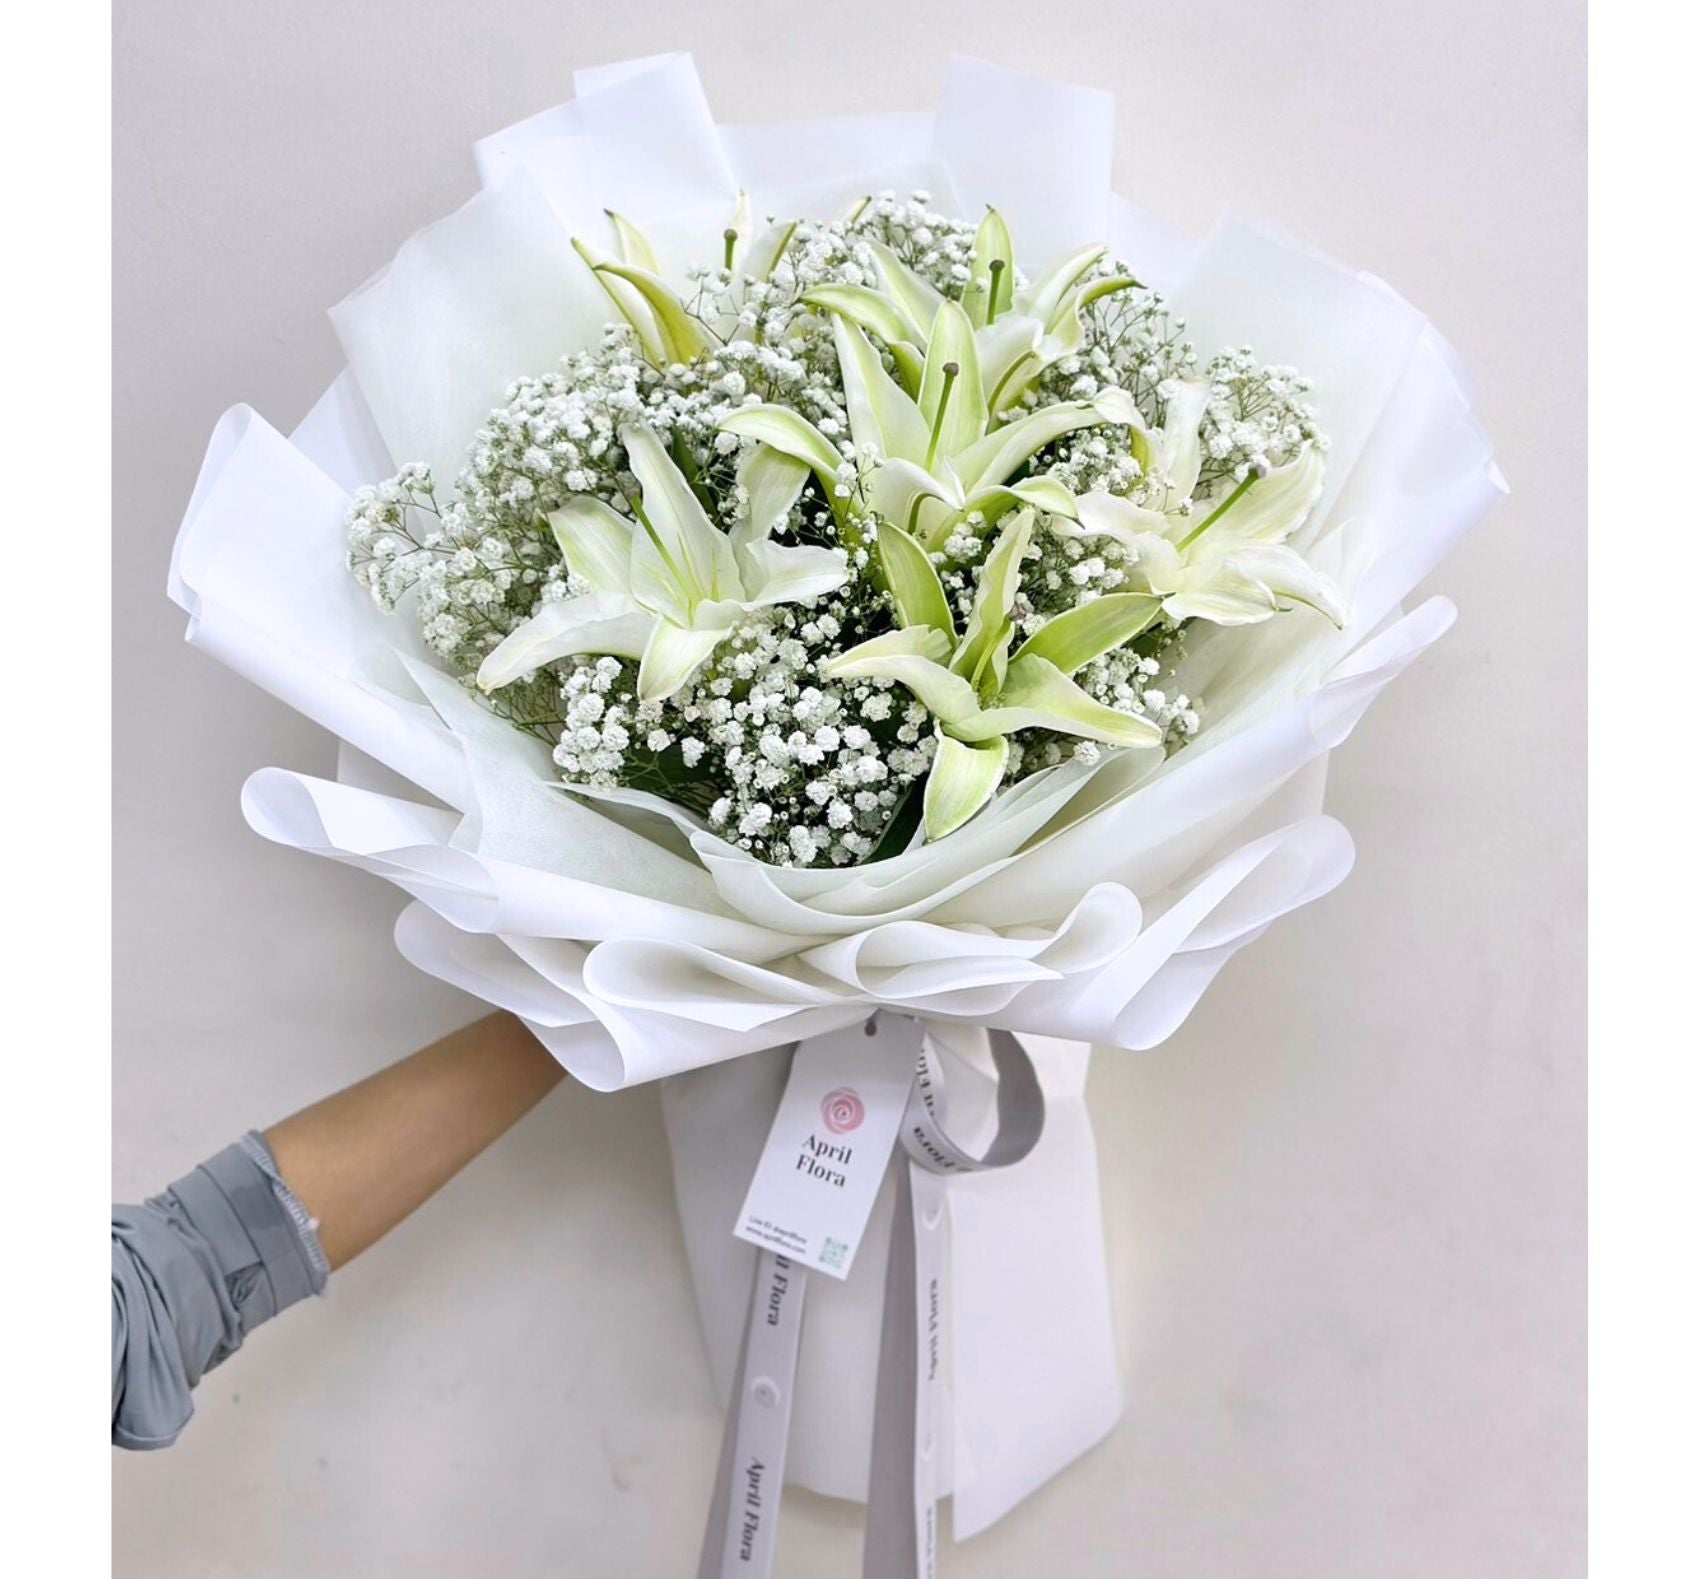 All Things Bright and Beautiful Bouquet